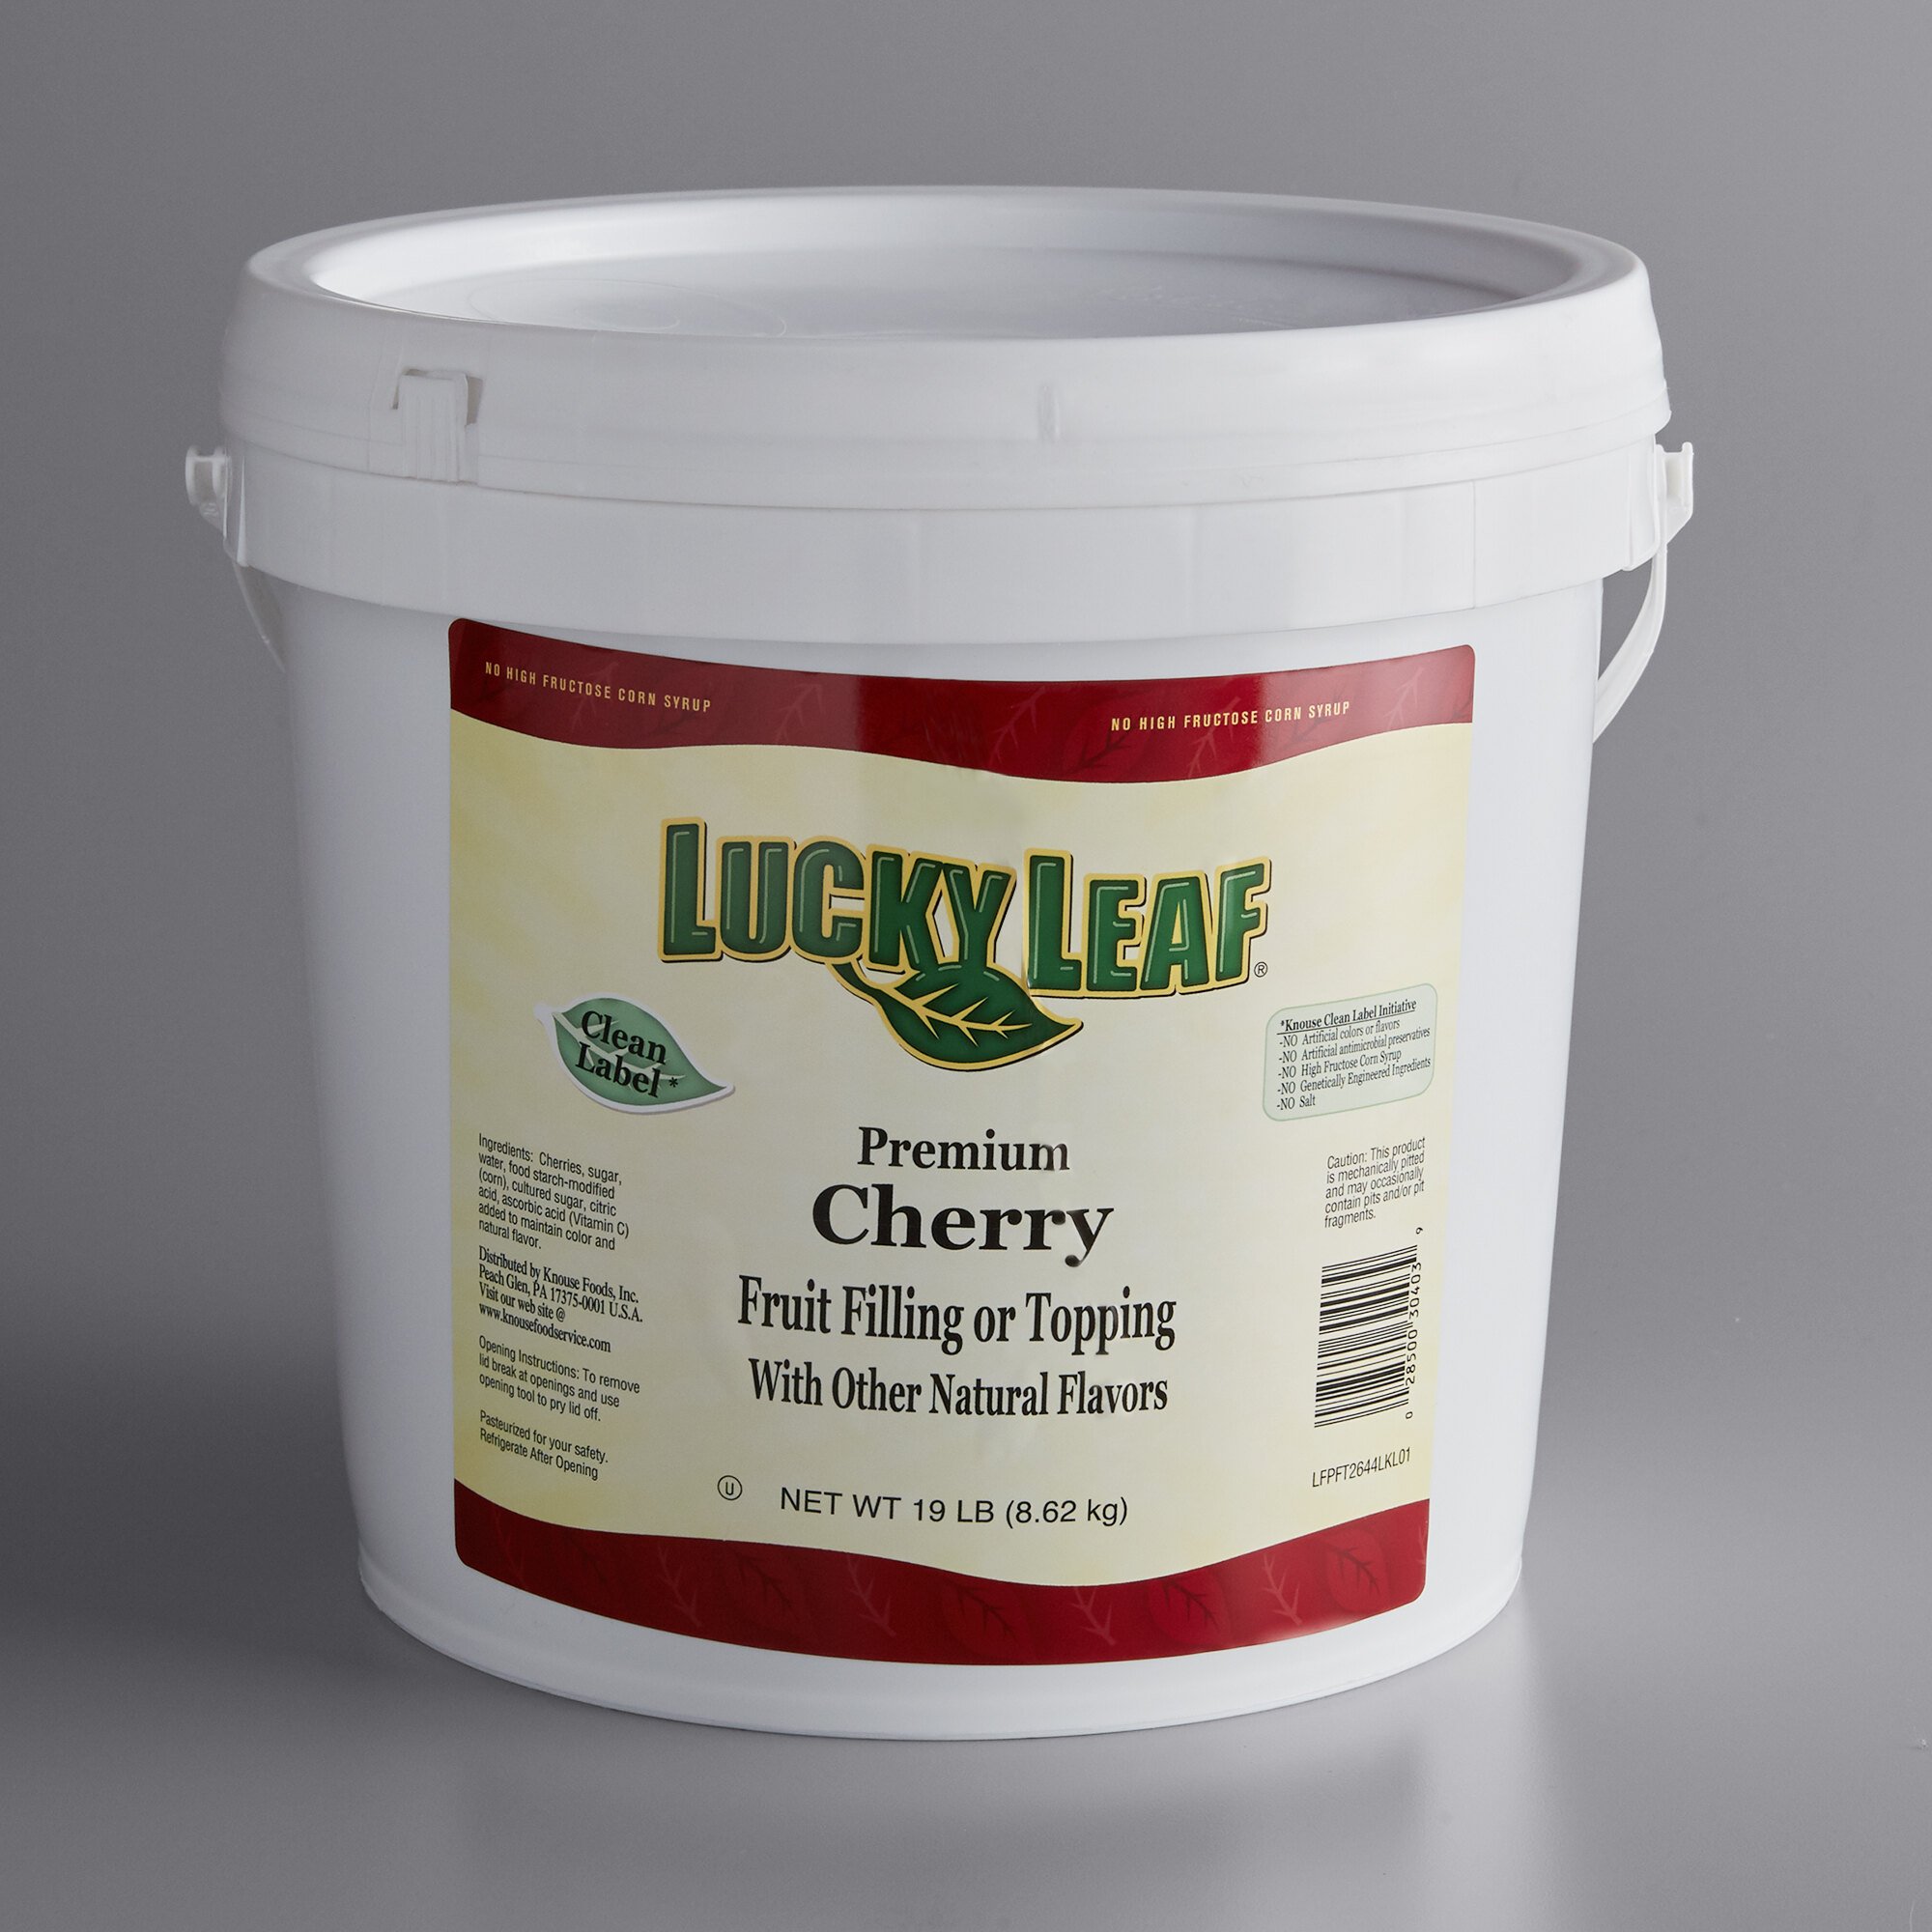 Lucky Leaf Premium Cherry Fruit Filling And Topping 19 Lb Pail